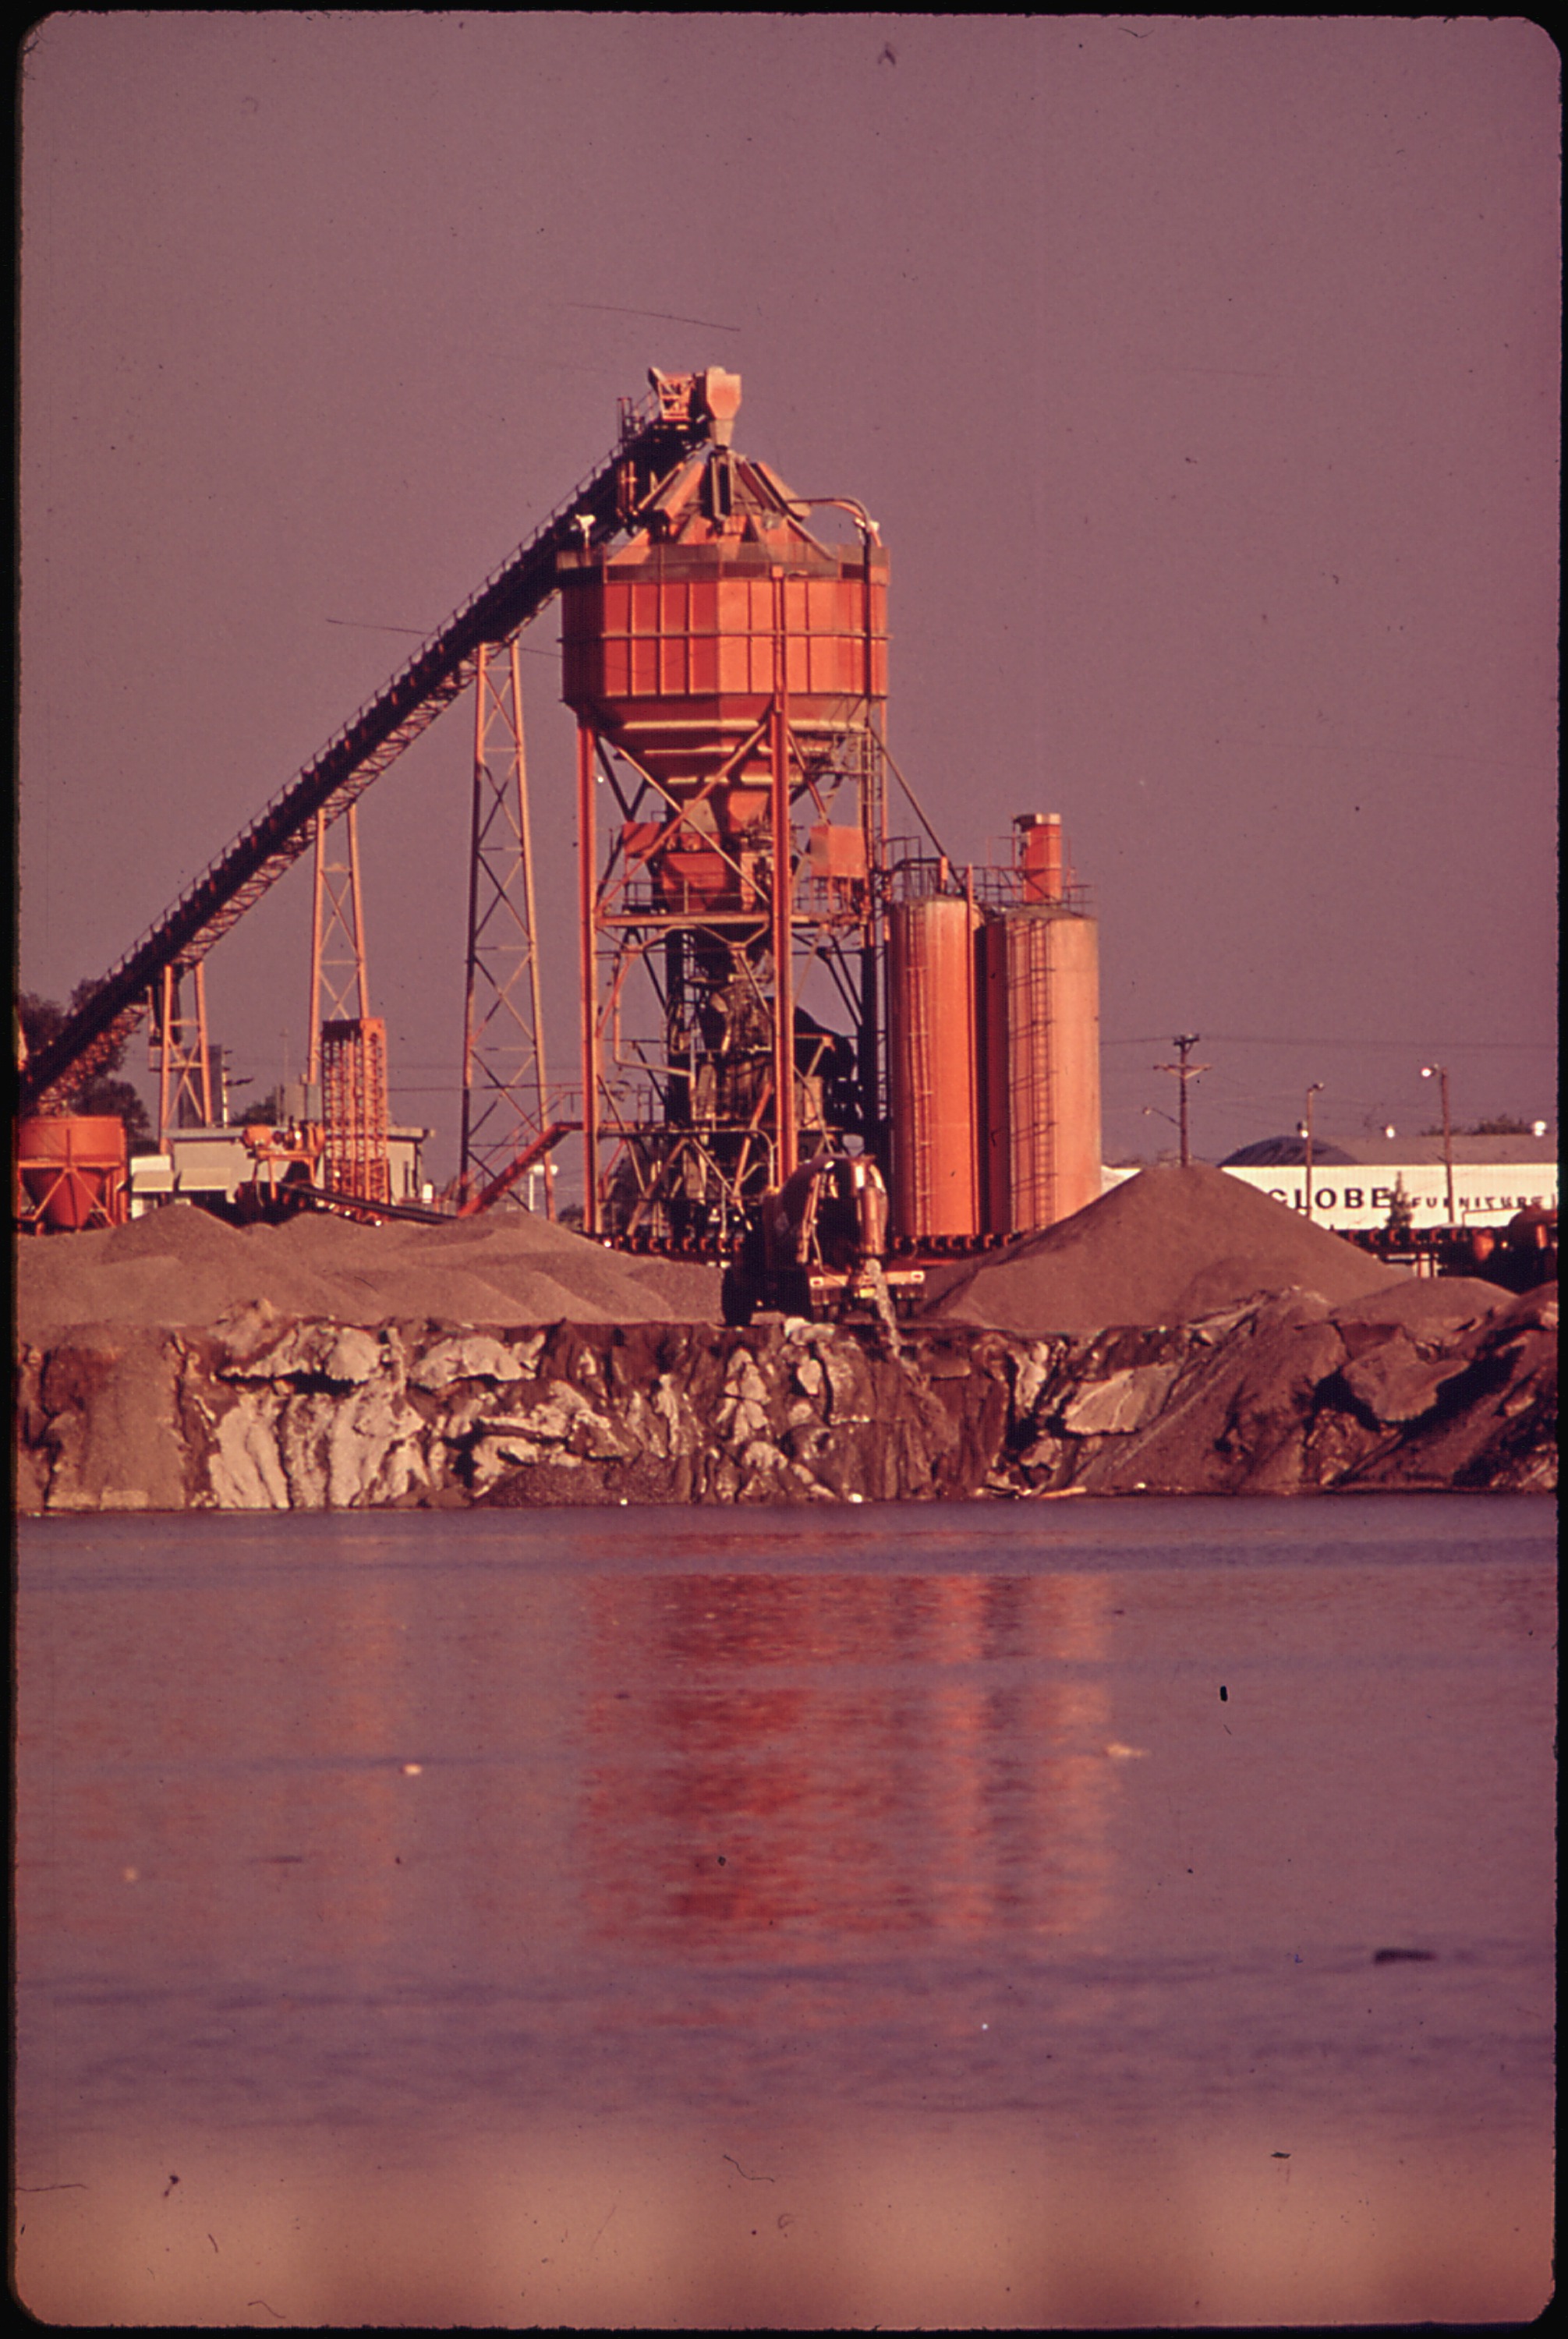 UNION ROCK AND MATERIAL PLANT. THE TRUCK IS DUMPING CONCRETE INTO THE SALT RIVER - NARA - 546752.jpg